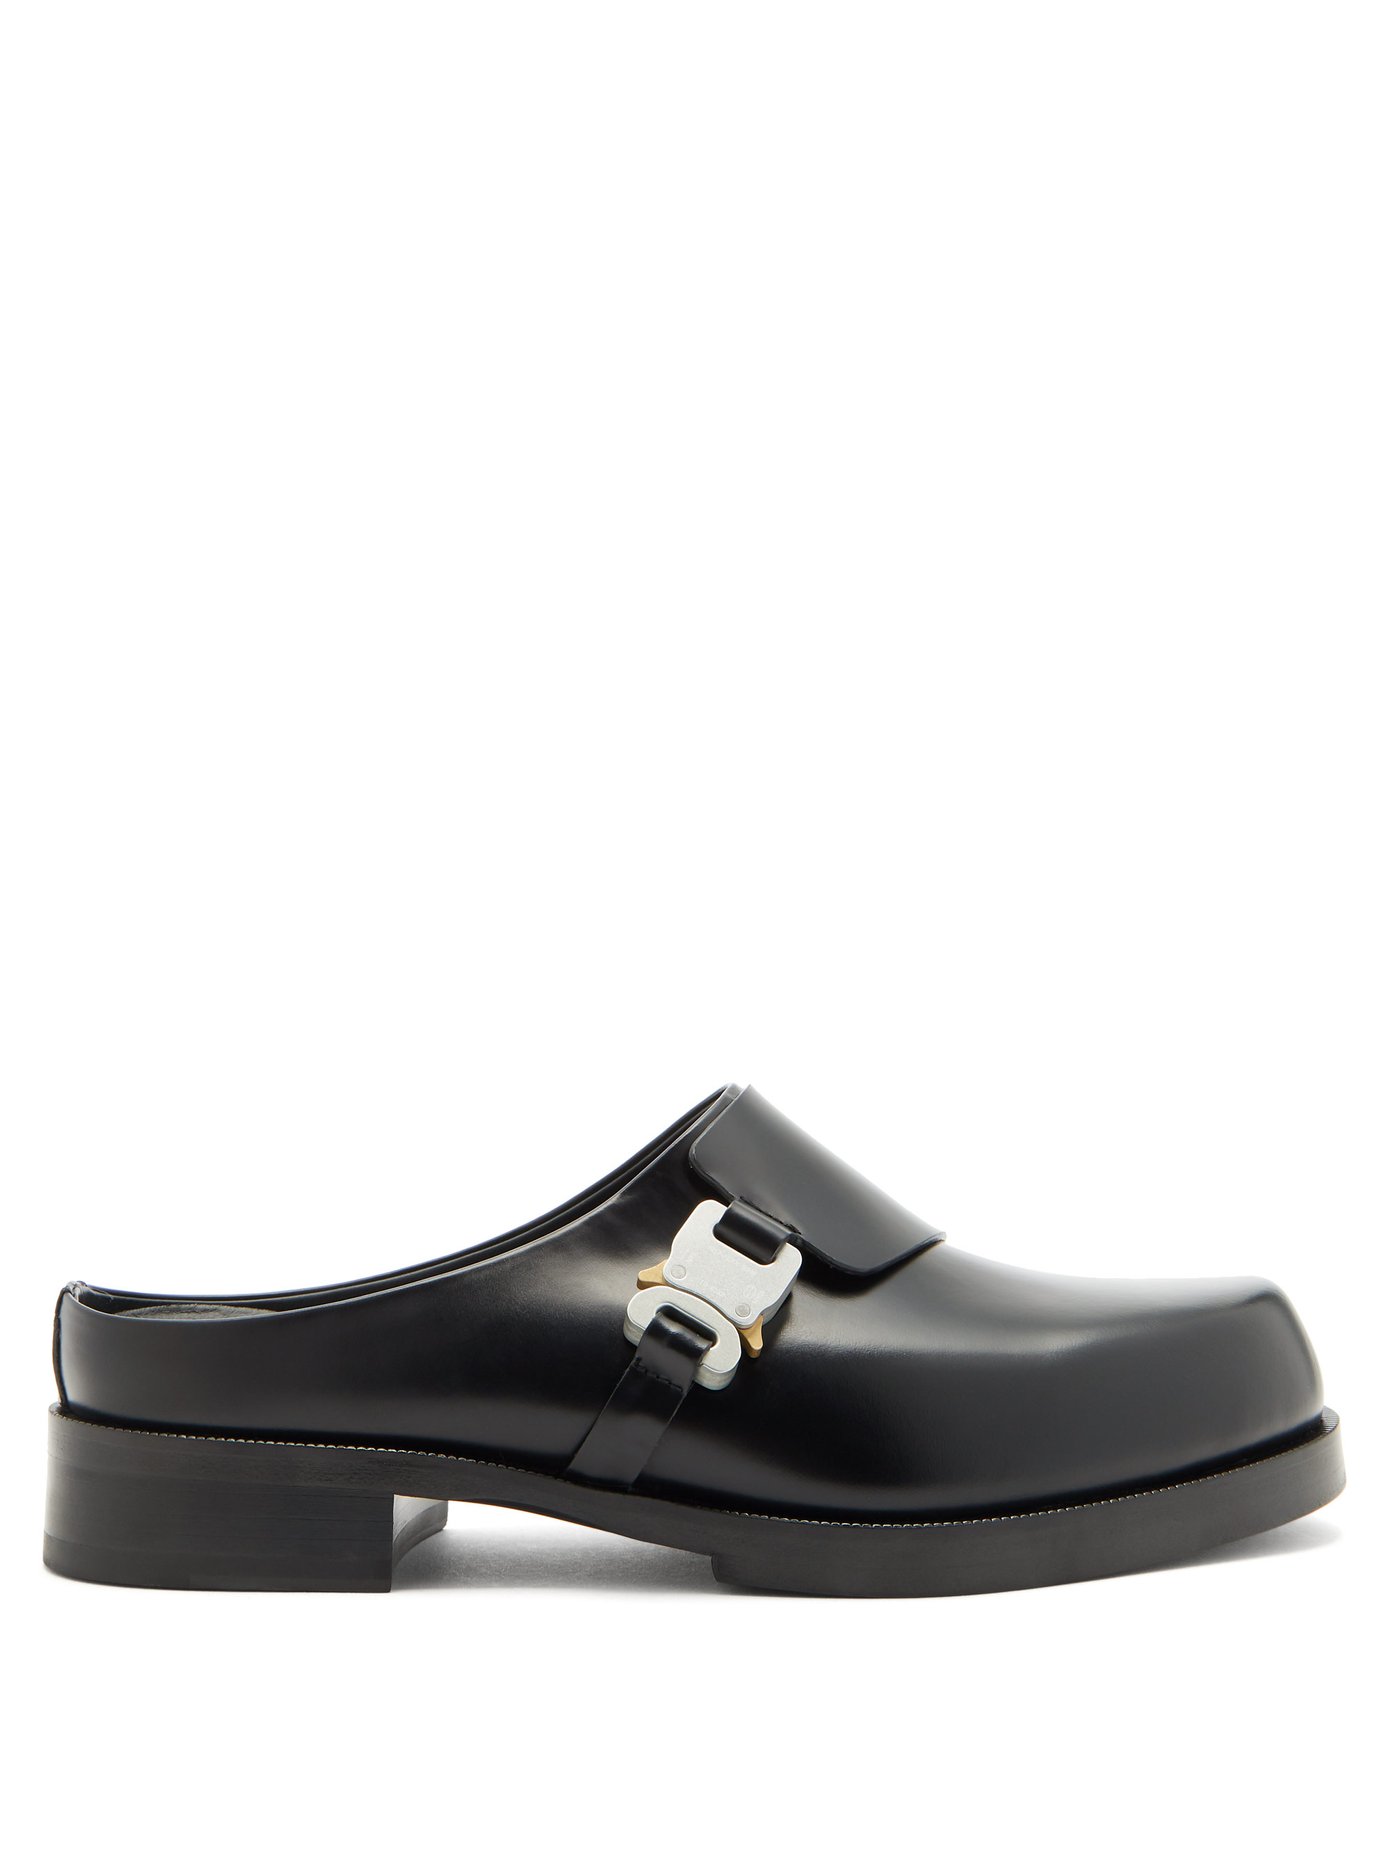 black clogs with buckle